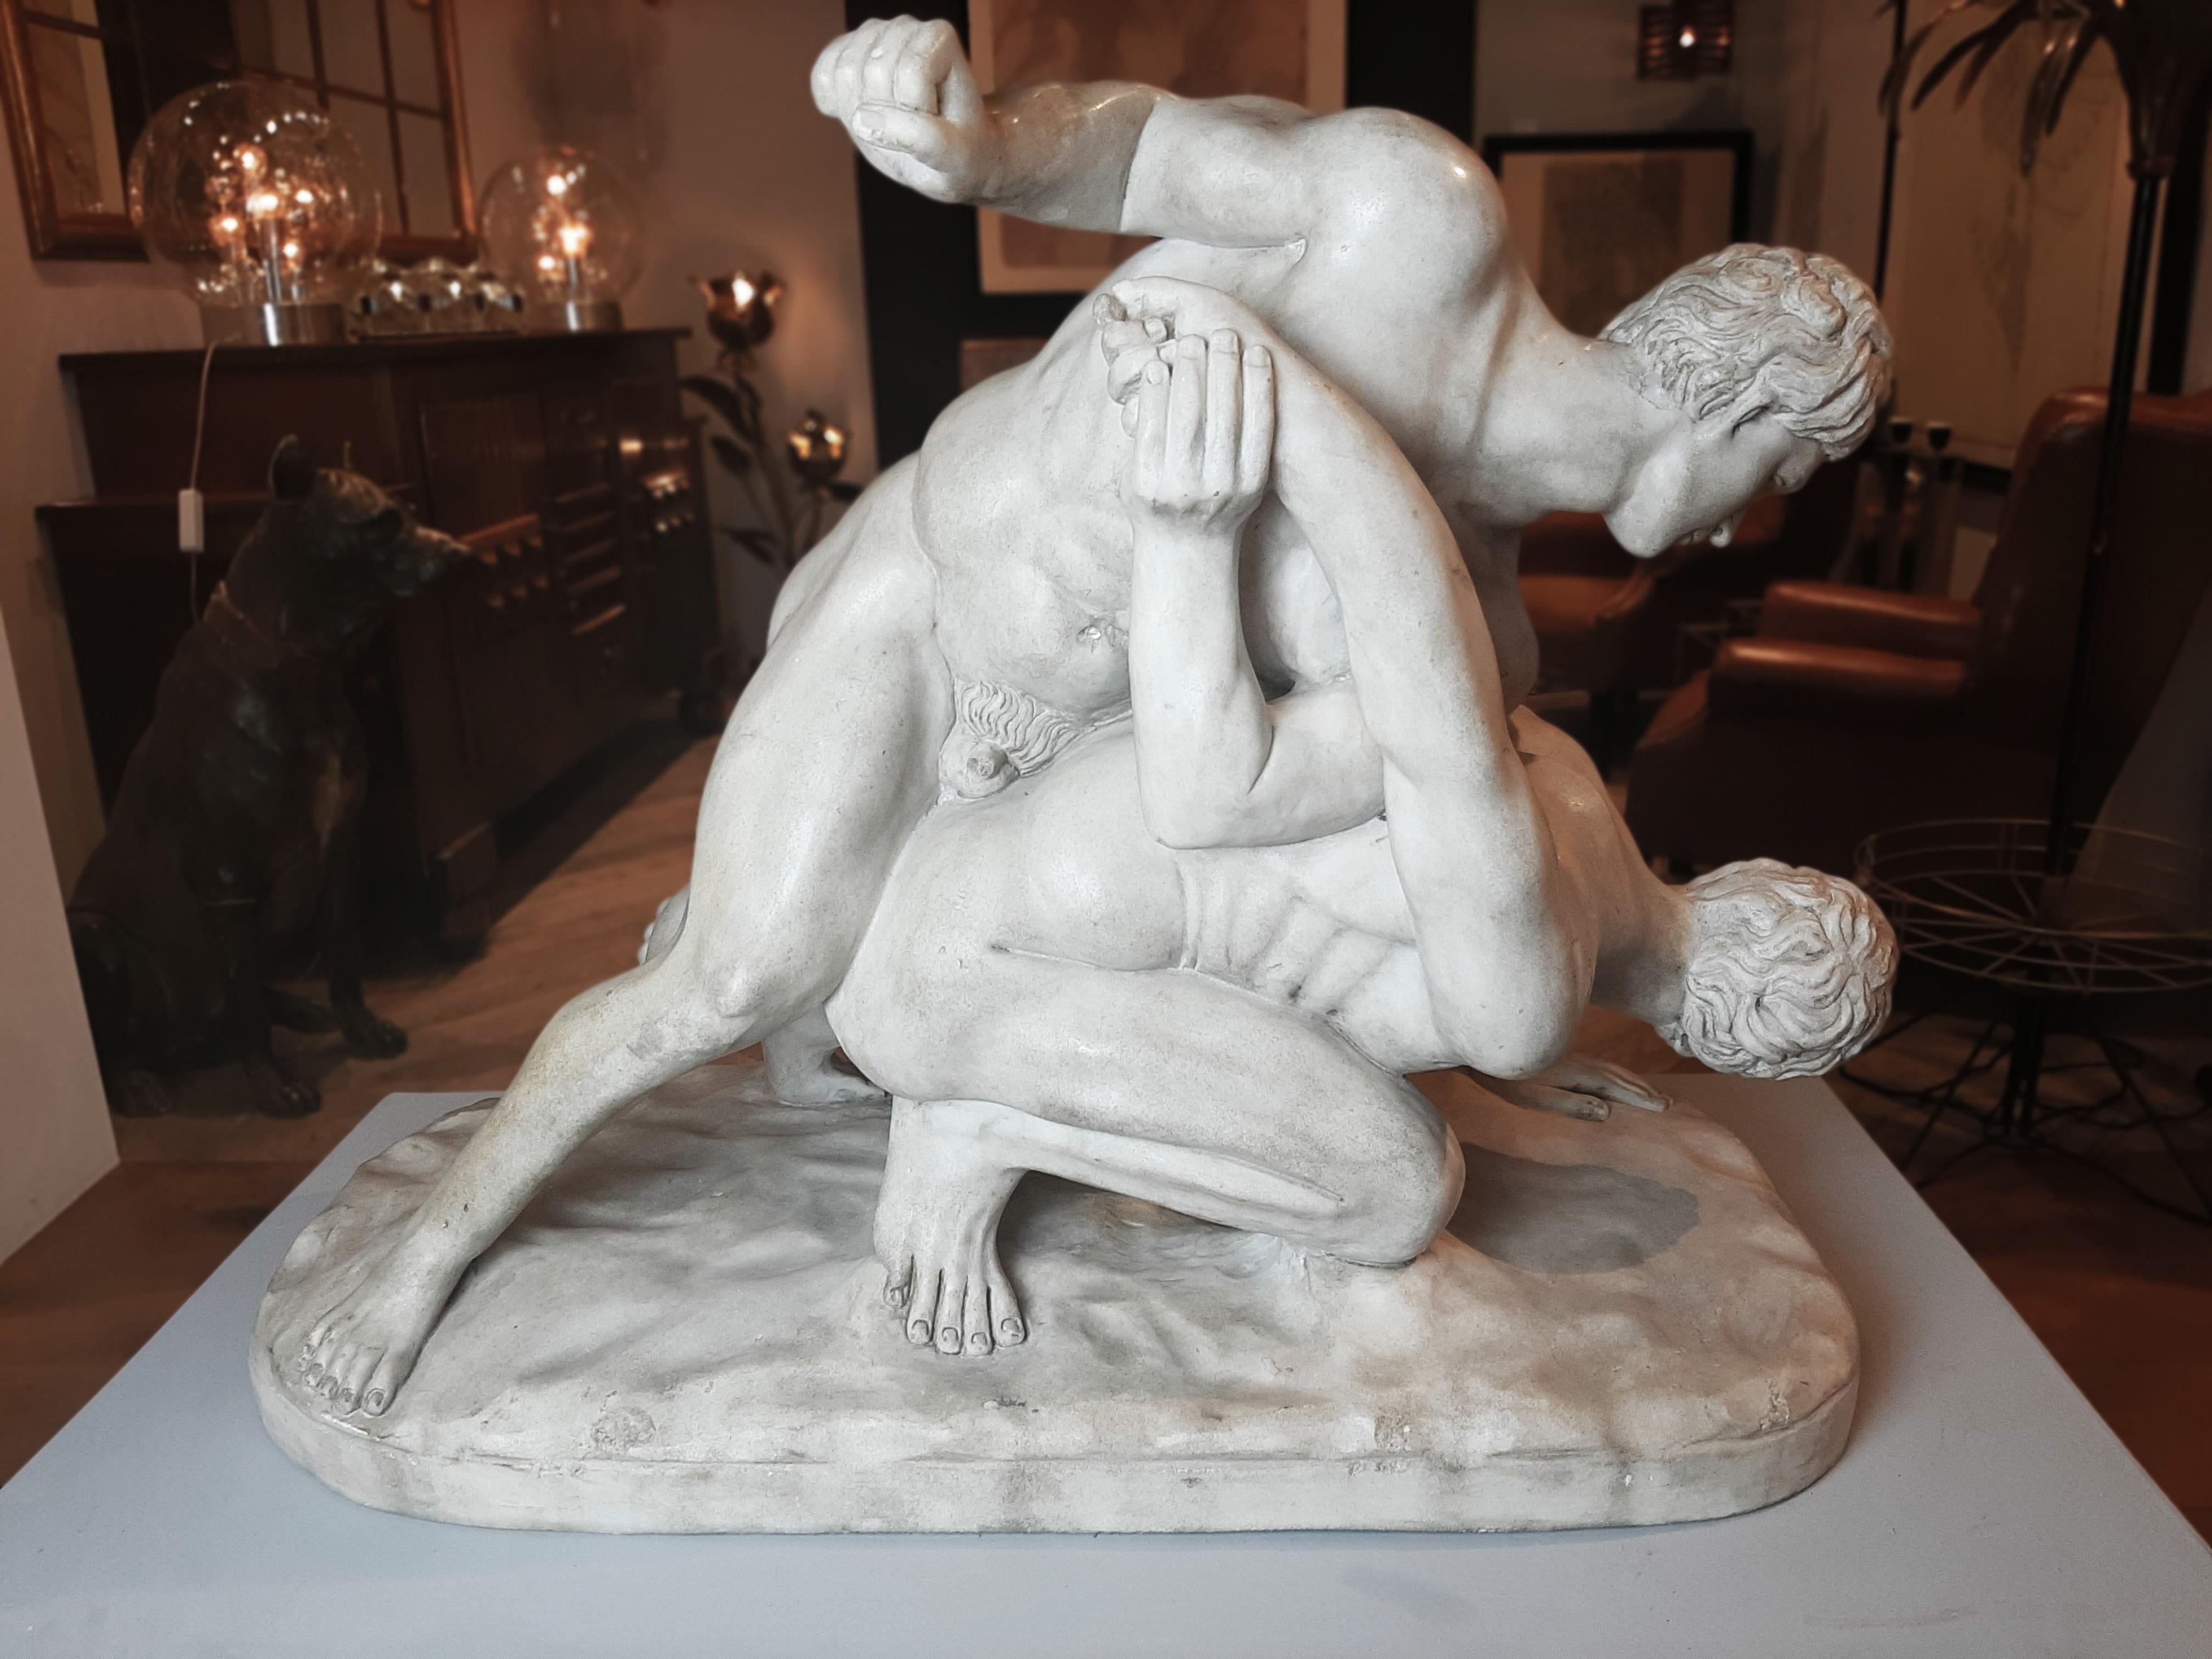 19th Century Grand Tour Marble Sculpture after the Antique Uffizi Wrestlers 3